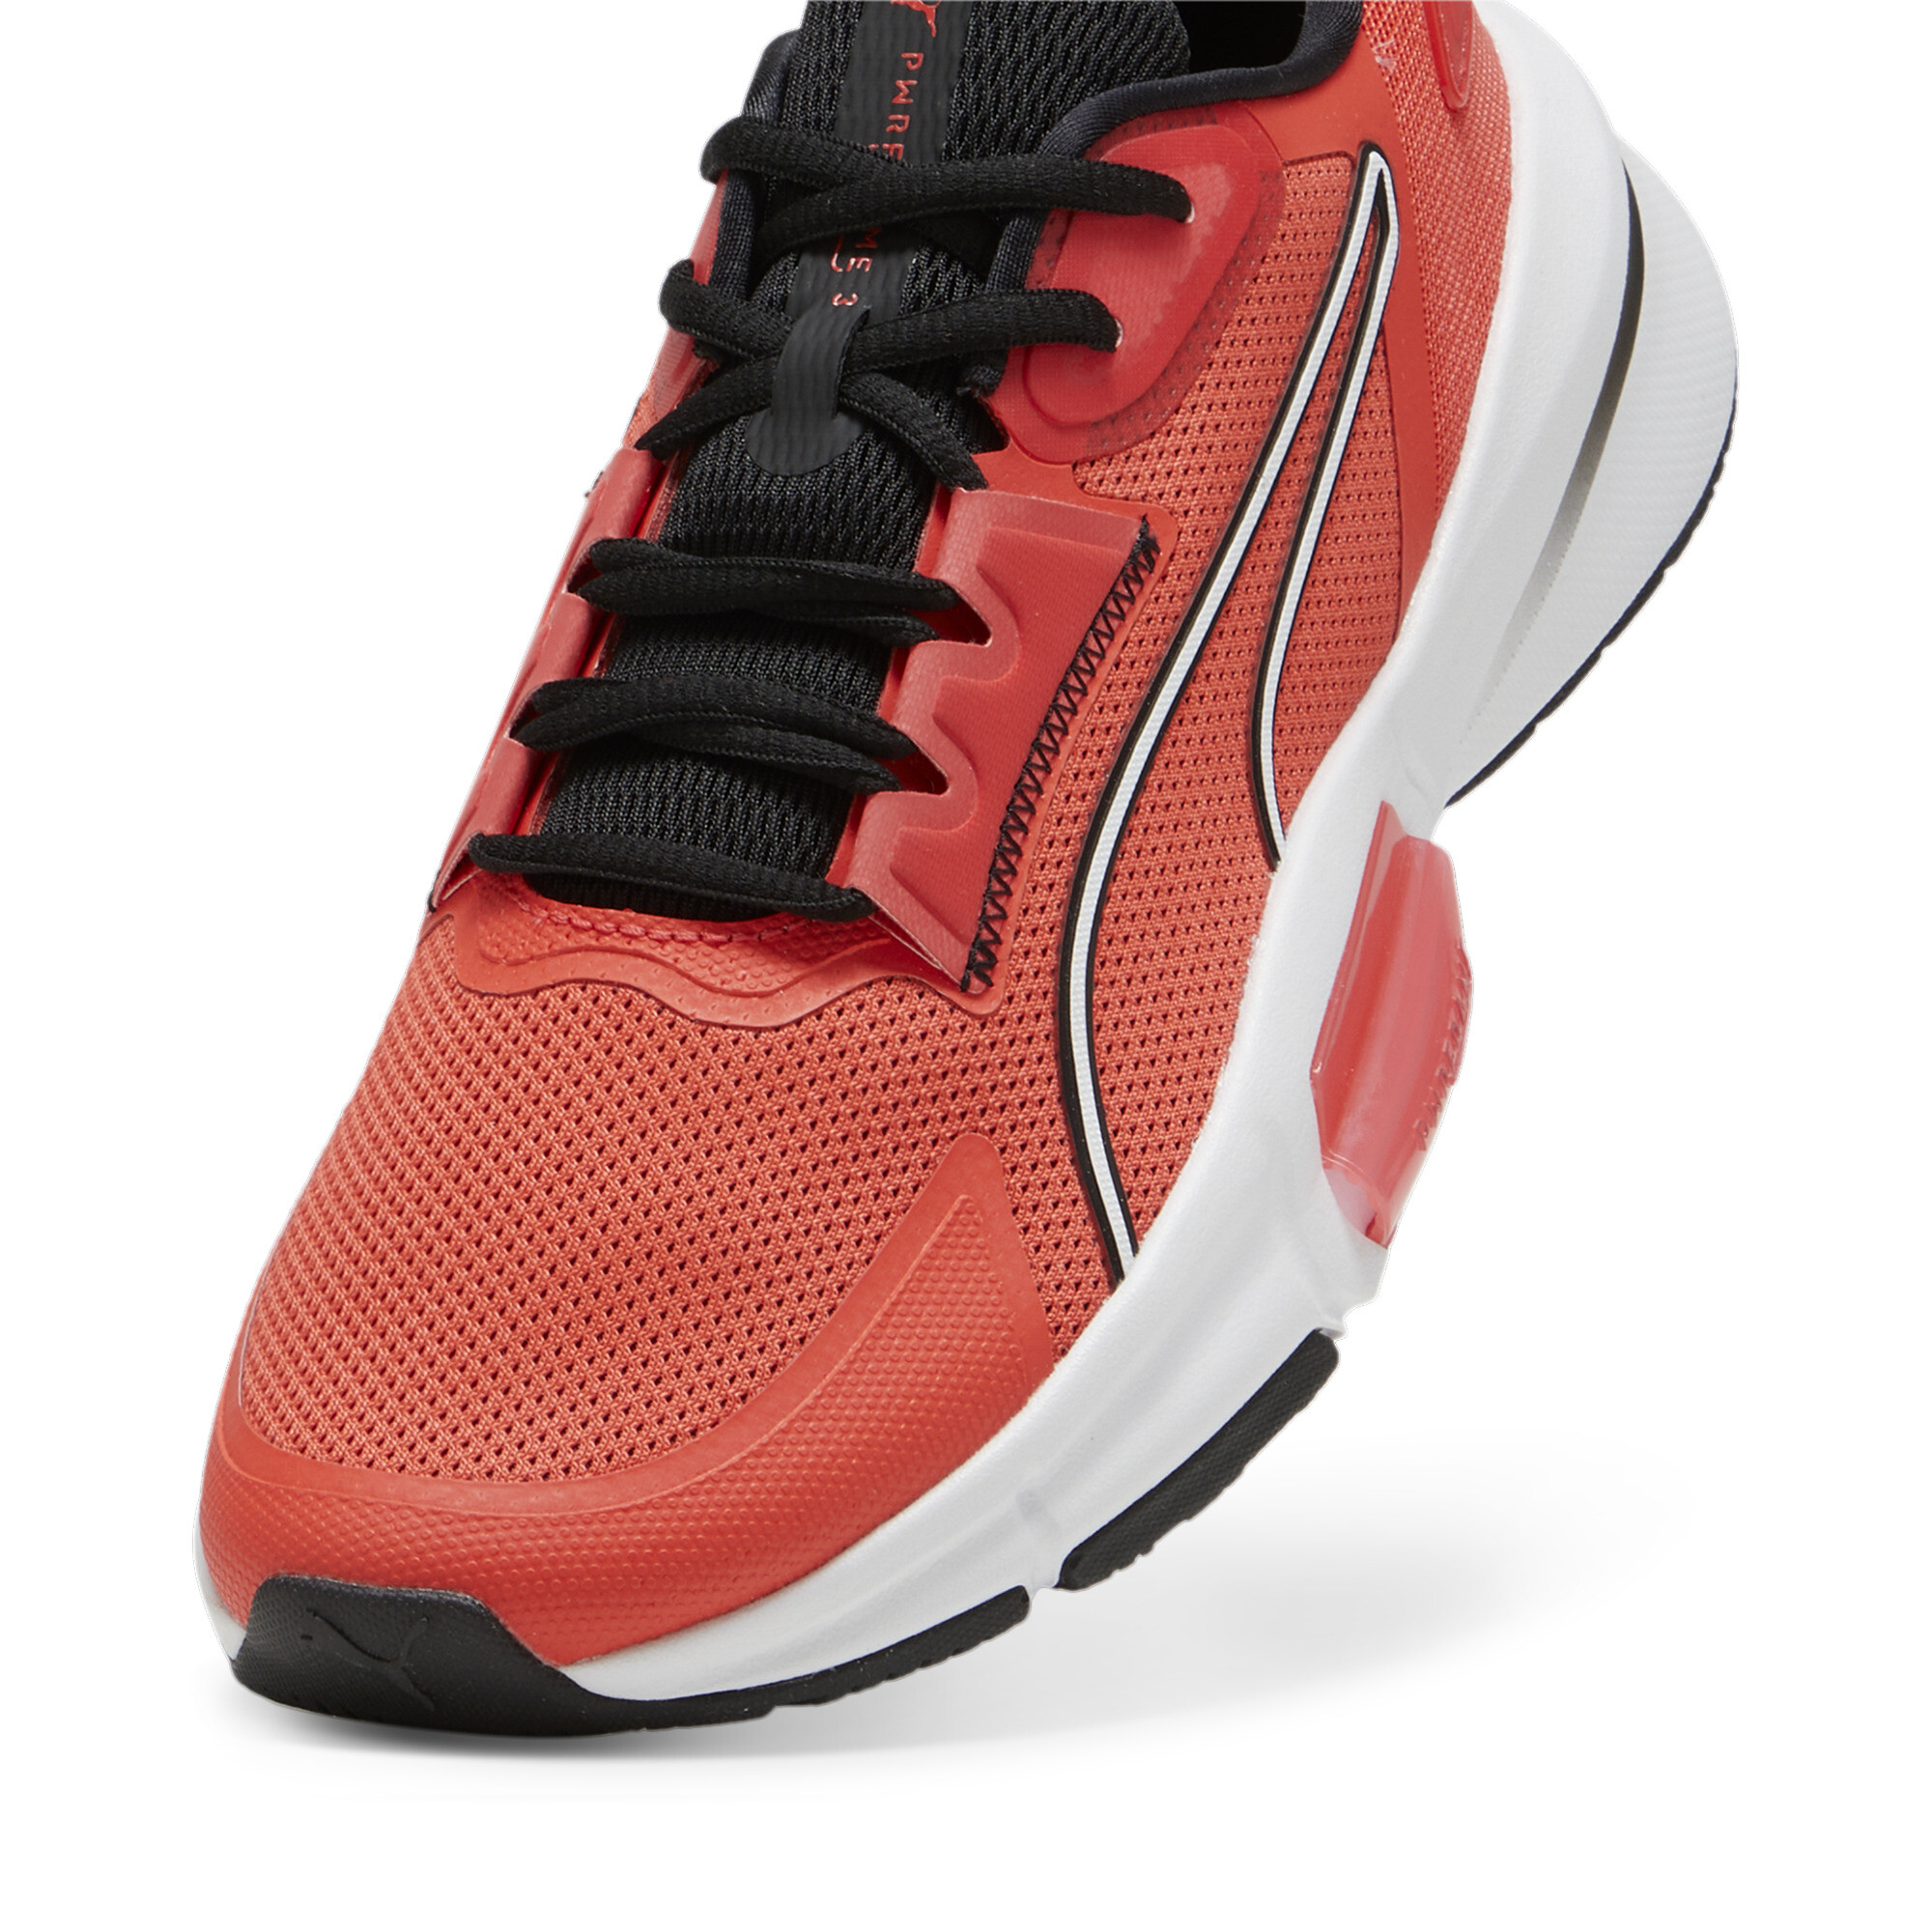 Men's PUMA PWRFrame TR 3 Training Shoes In Red, Size EU 42